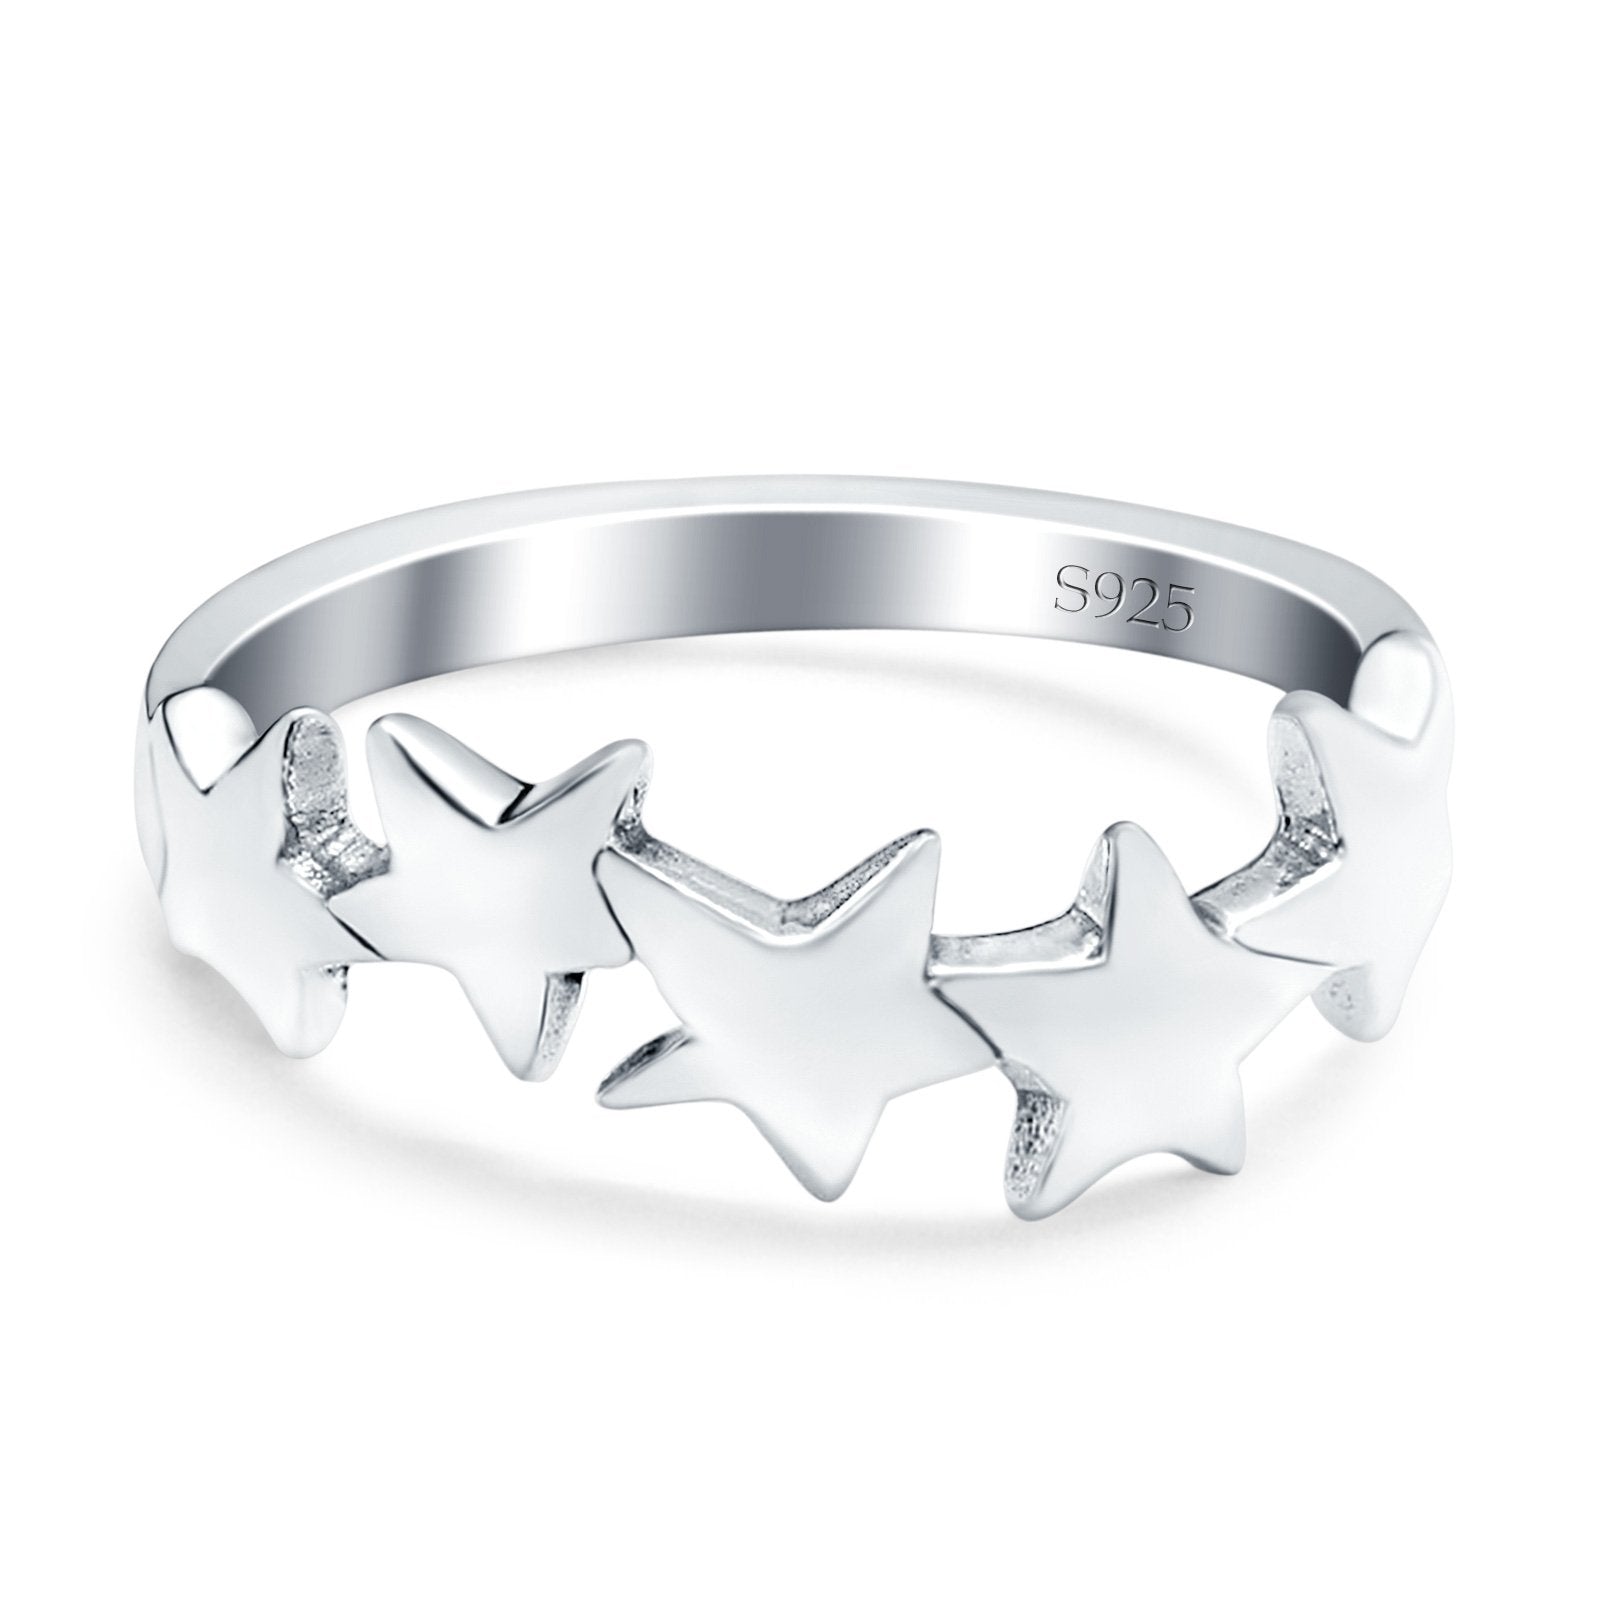 Stars Sideways Plain Ring Oxidized Band Solid 925 Sterling Silver